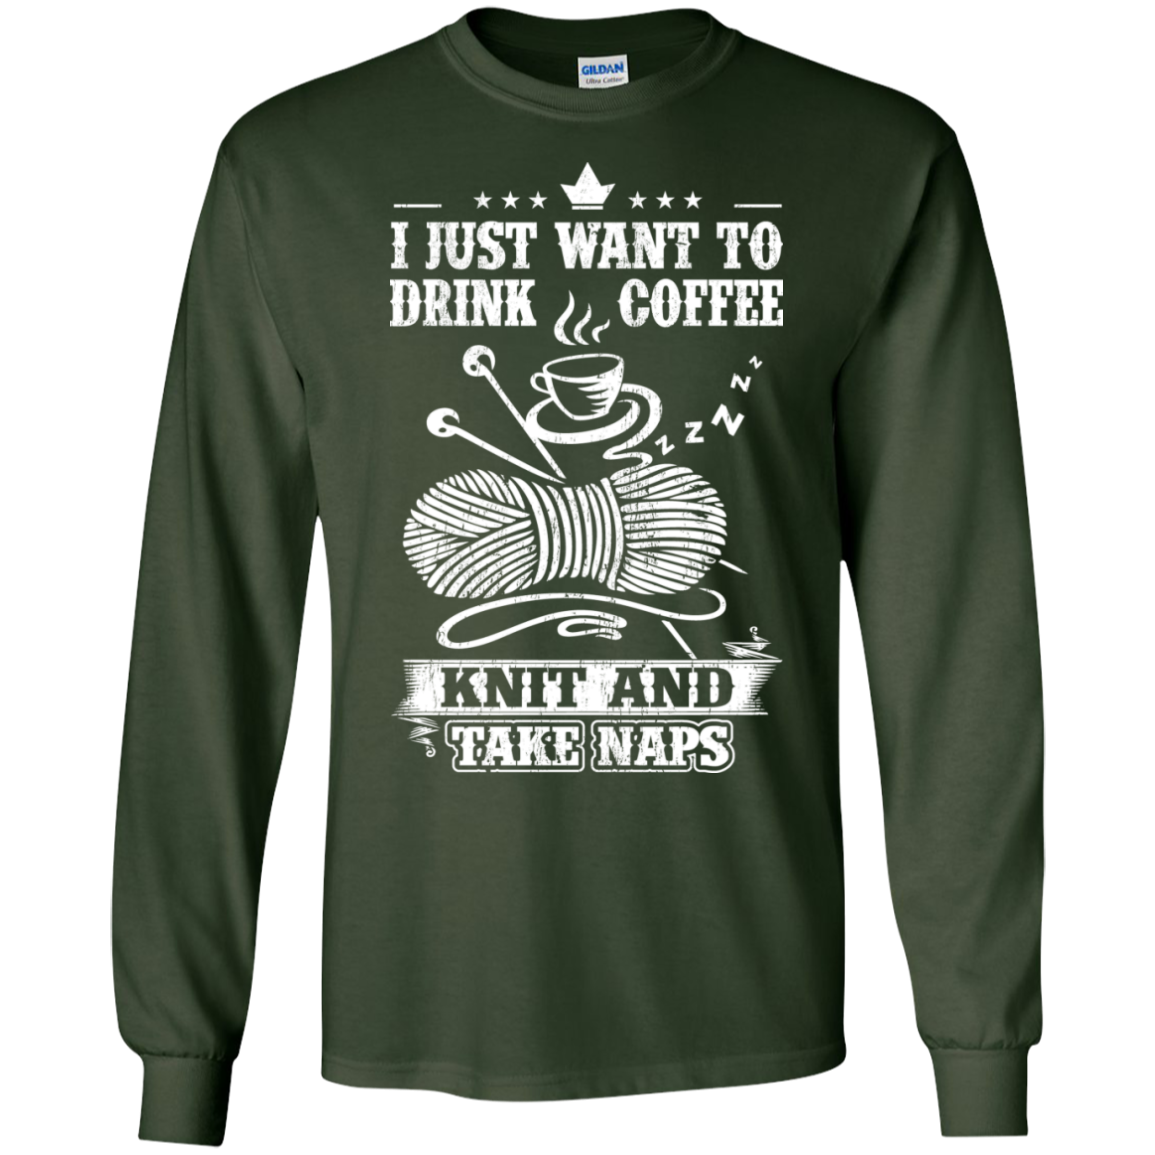 Coffee-Knit-Nap Long Sleeve Ultra Cotton T-Shirt - Crafter4Life - 5